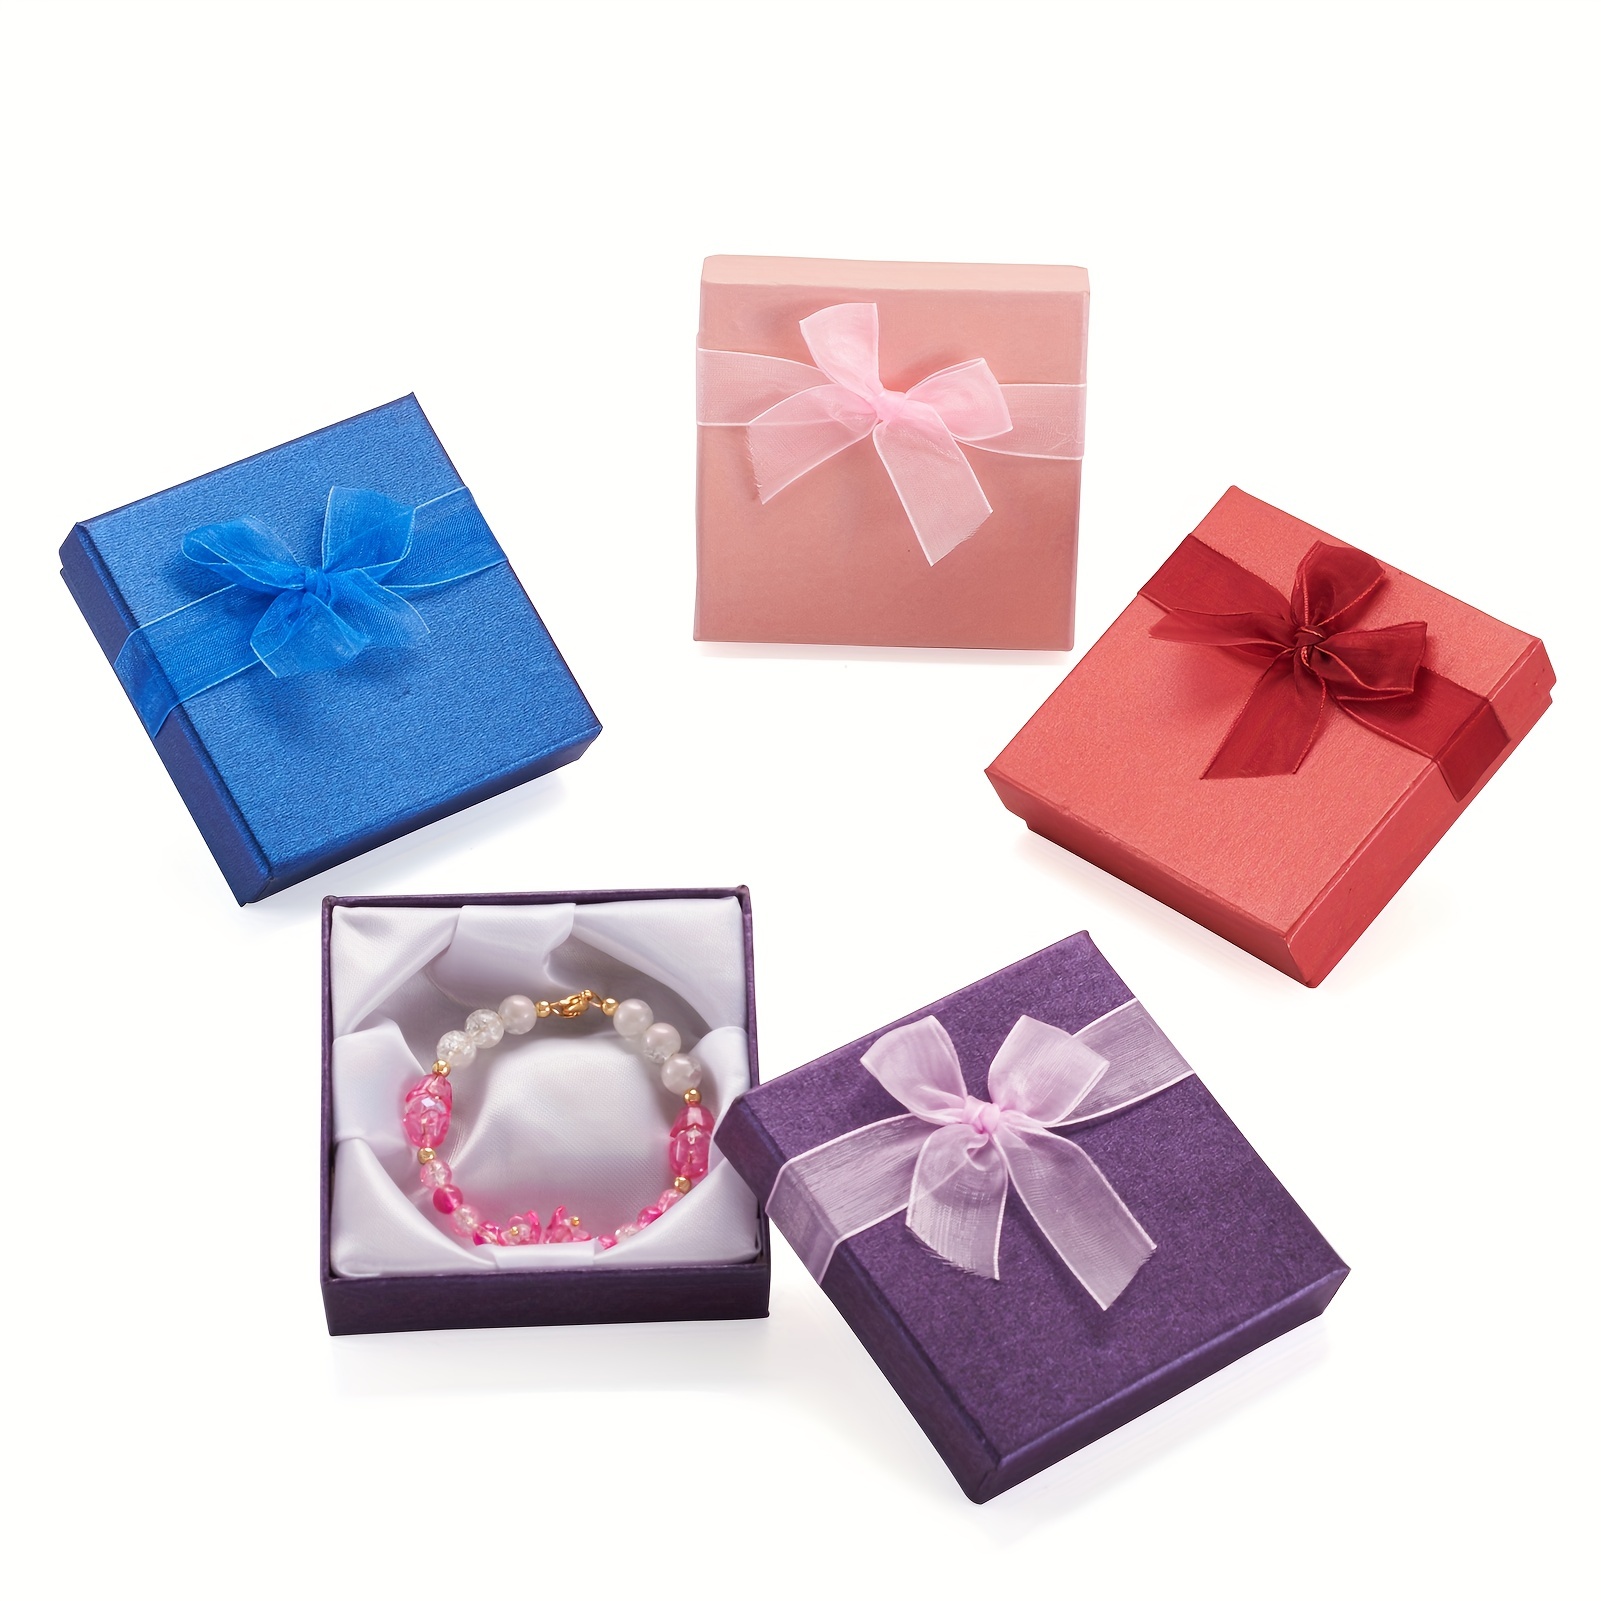 6pcs Cardboard Jewelry Boxes - Bulk Gift Box for Small Business